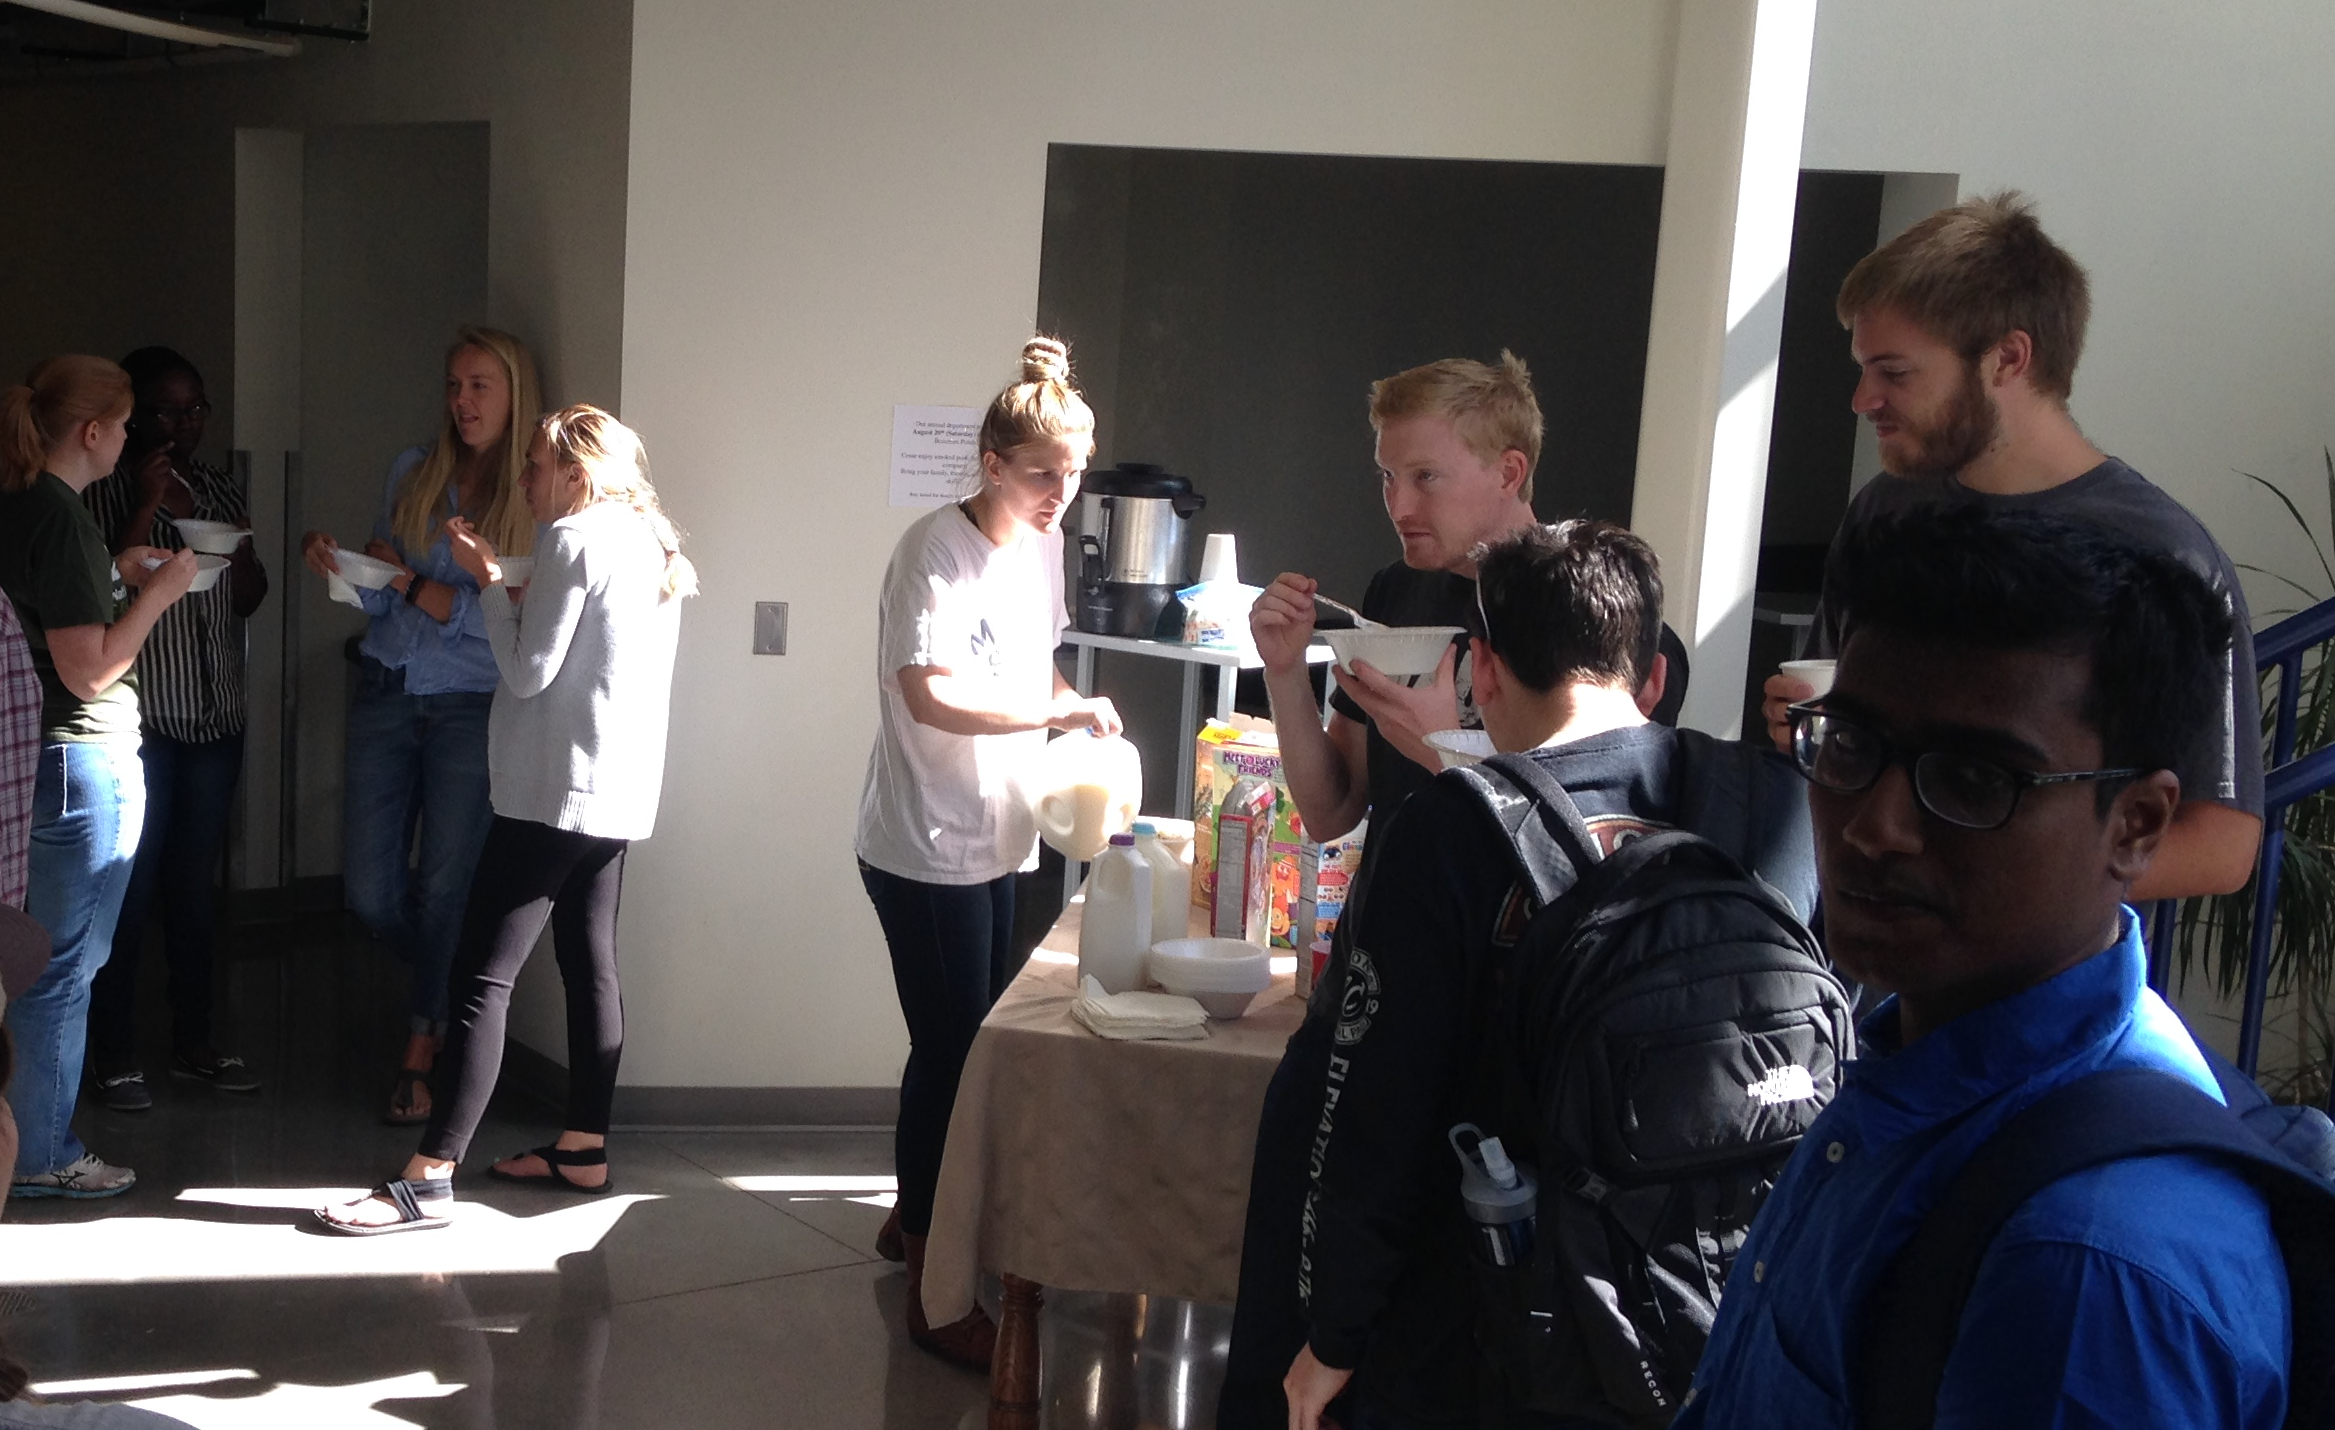 grad students eating cereal at a morning breakfast event from 2019